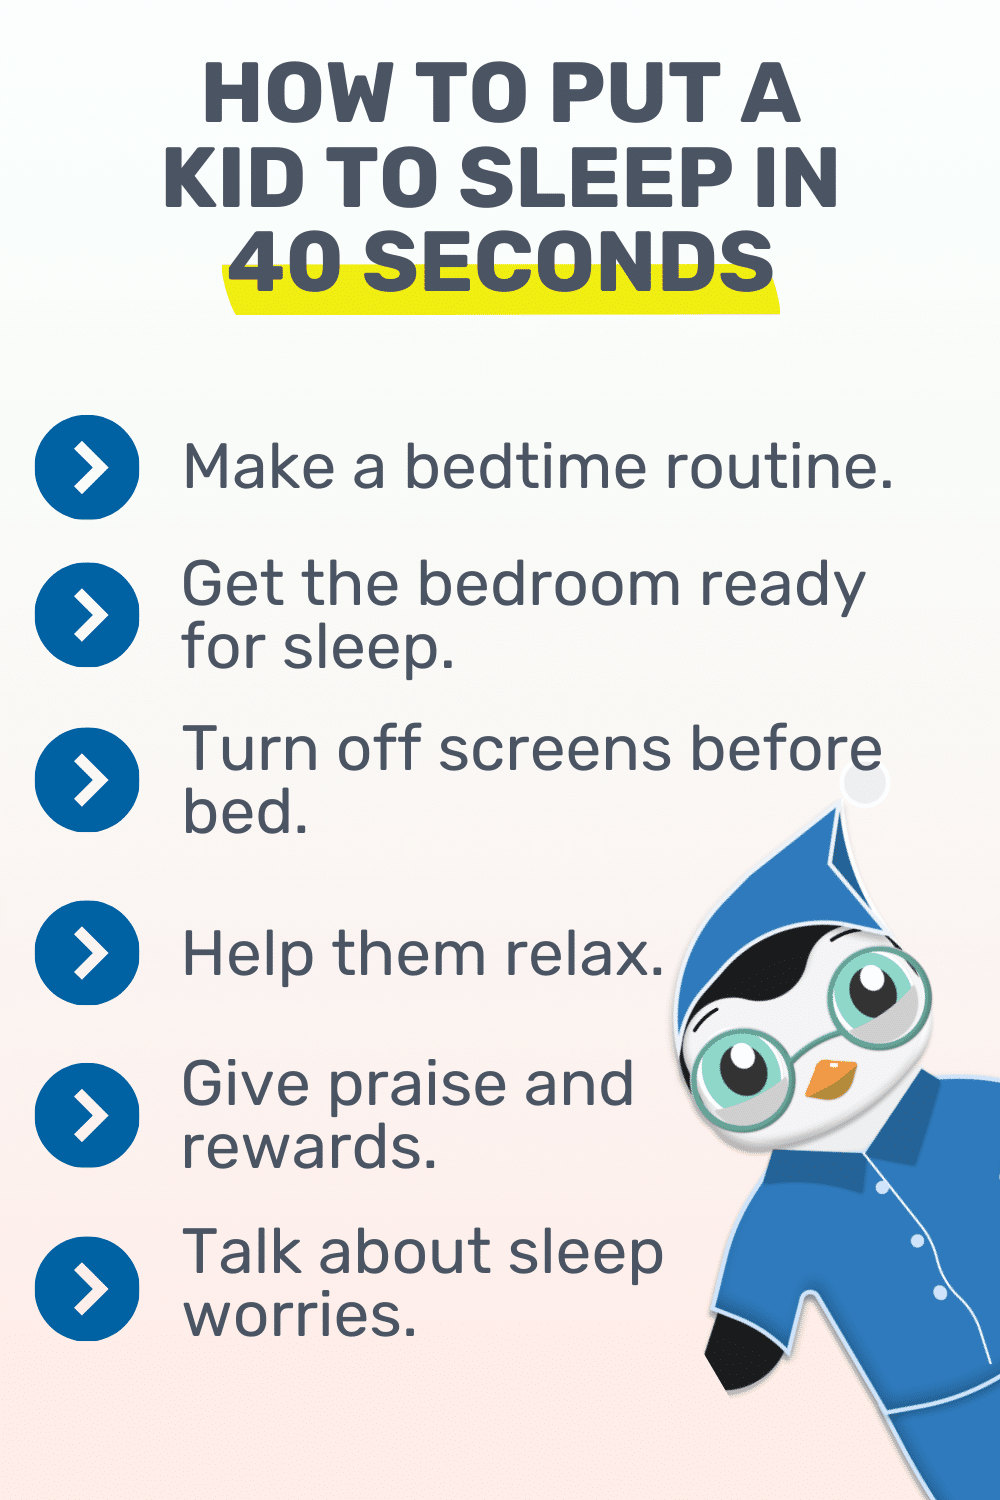 How to Put a Kid to Sleep in 40 Seconds